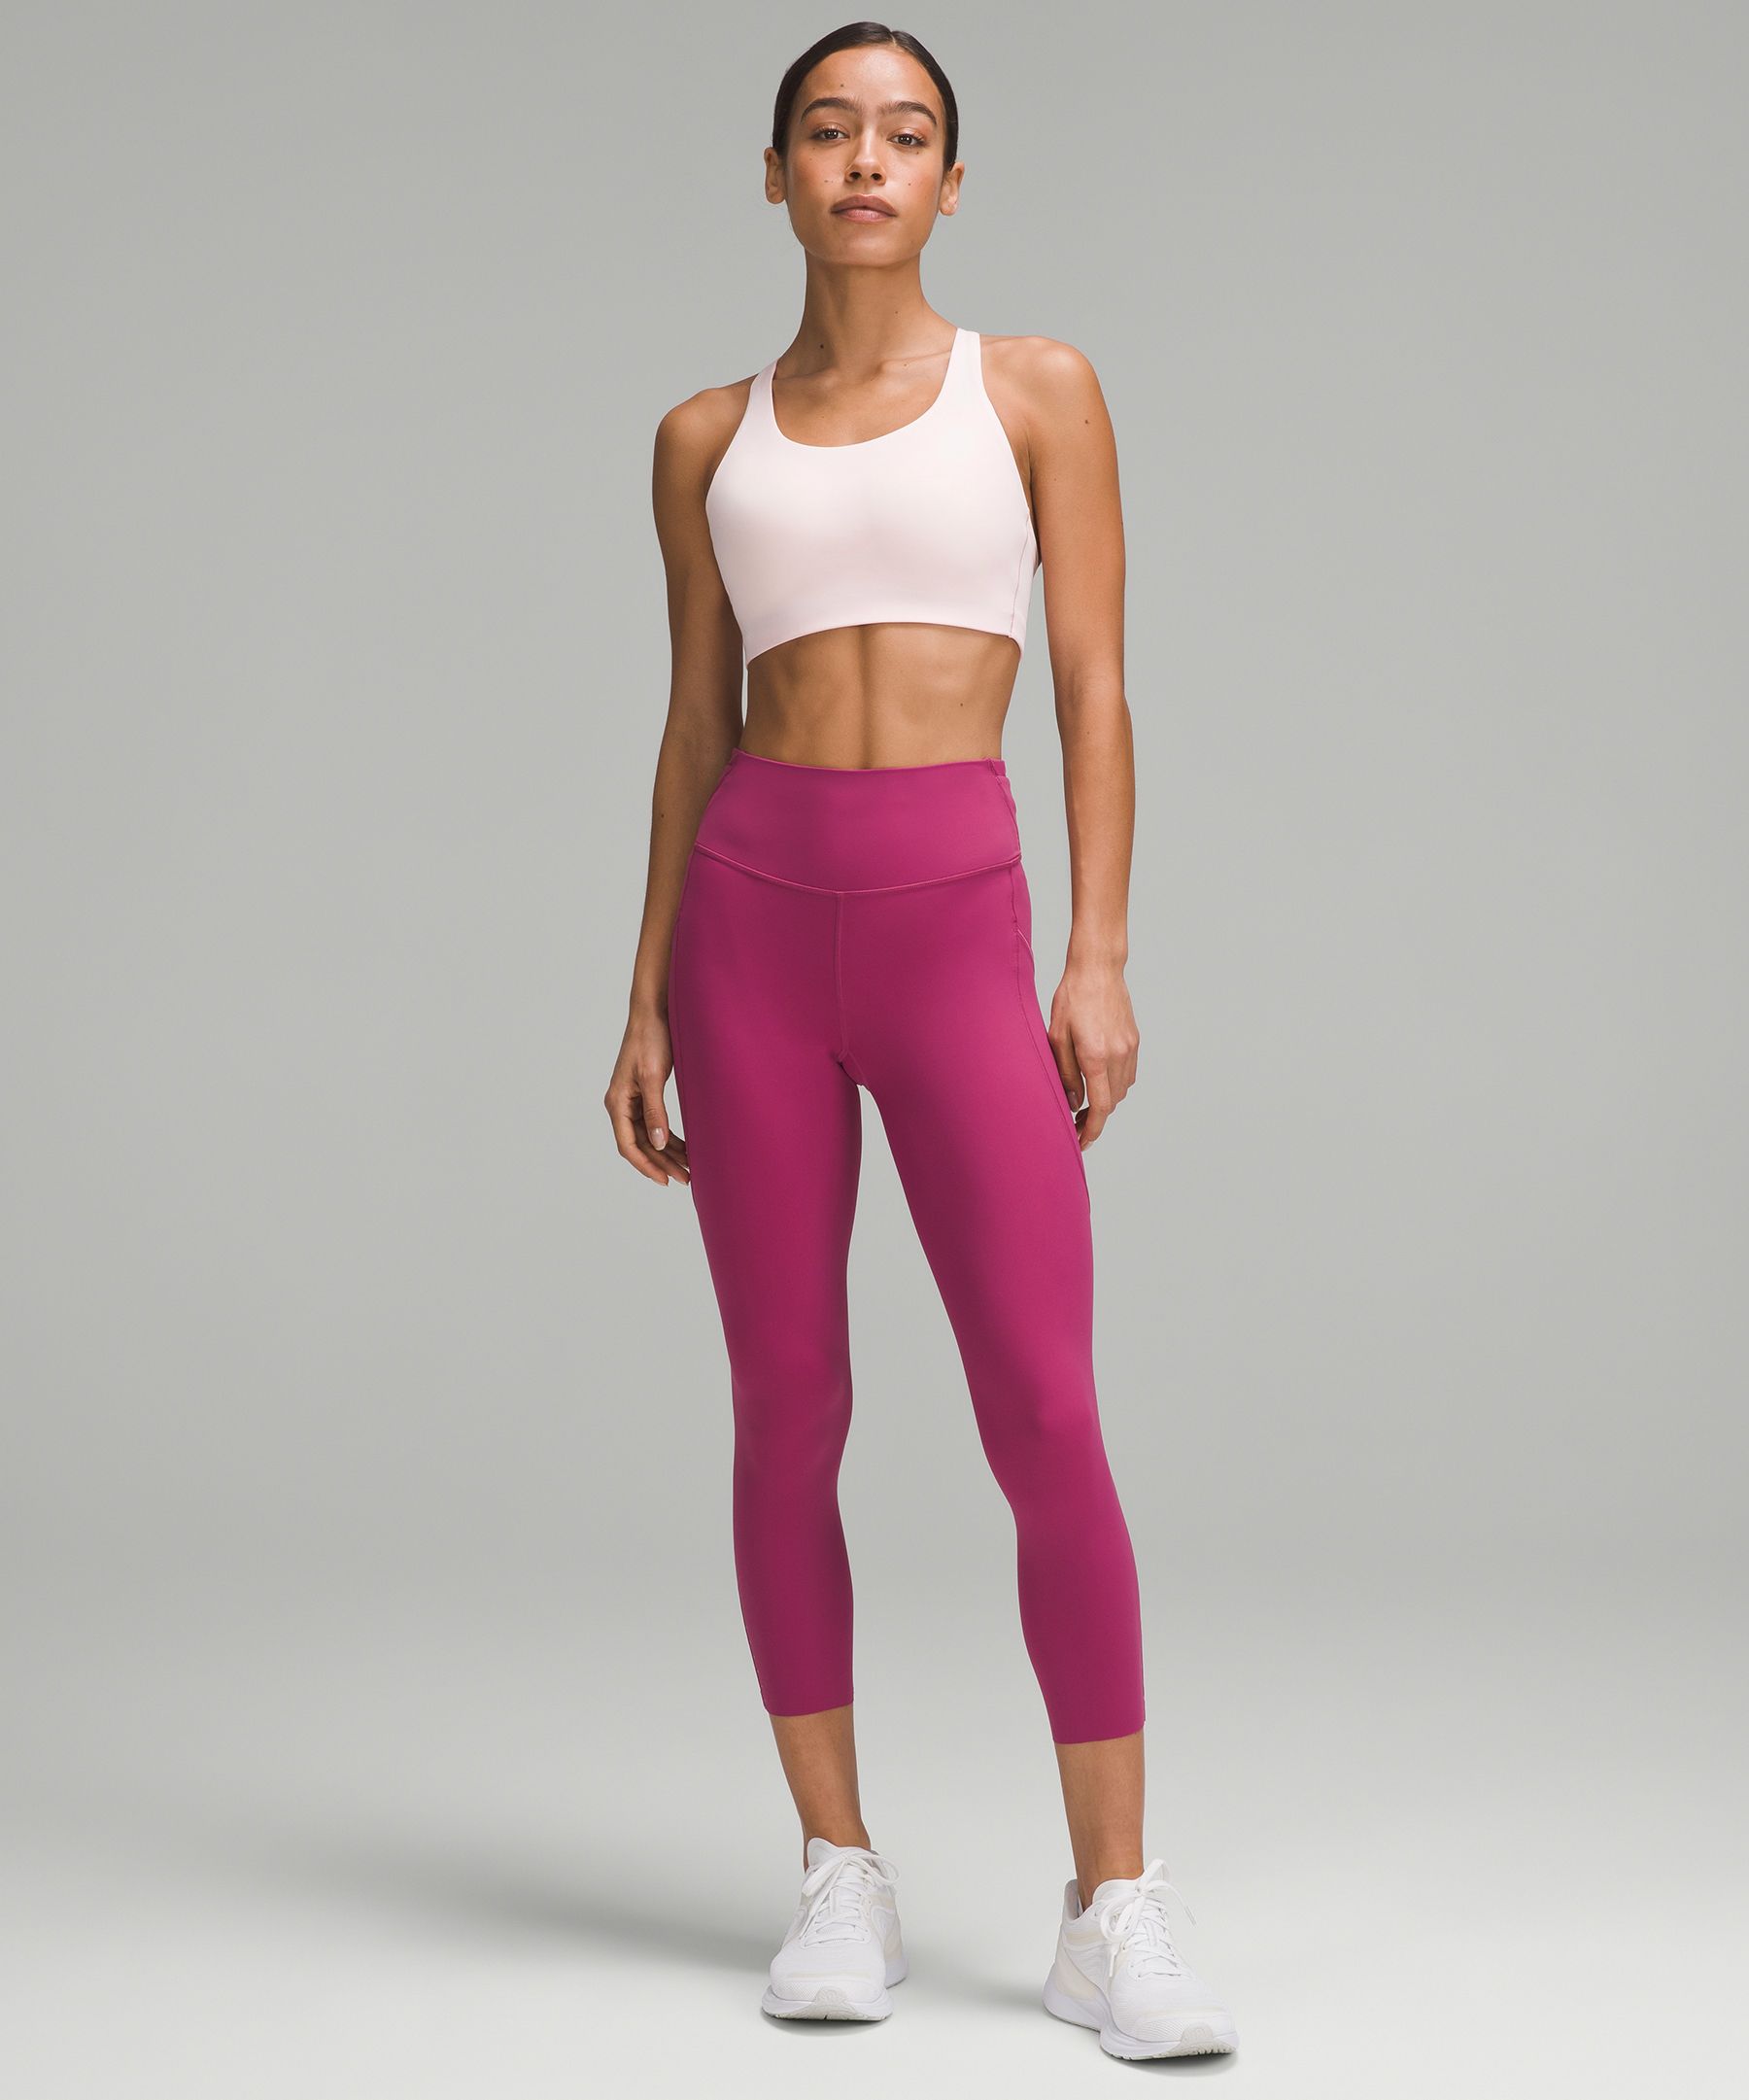 Lululemon All Powered Up Sports Bra in Pastel Pink, NWT, 32DD